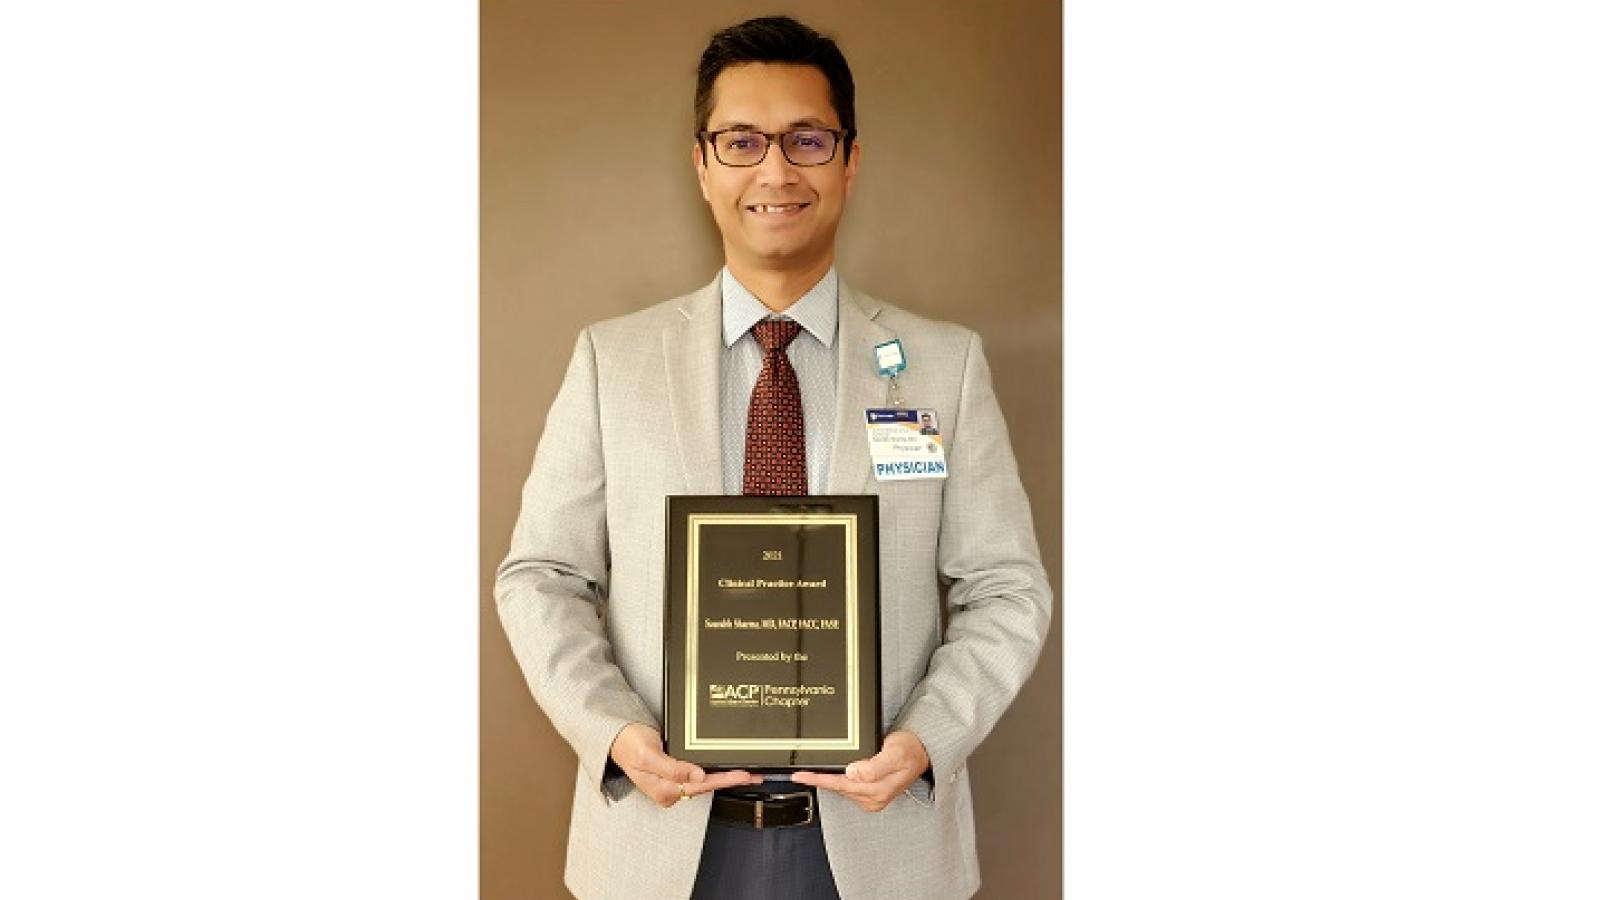 Dr. Sharma Named Recipient of 2021 ACP Clinical Practice Award 